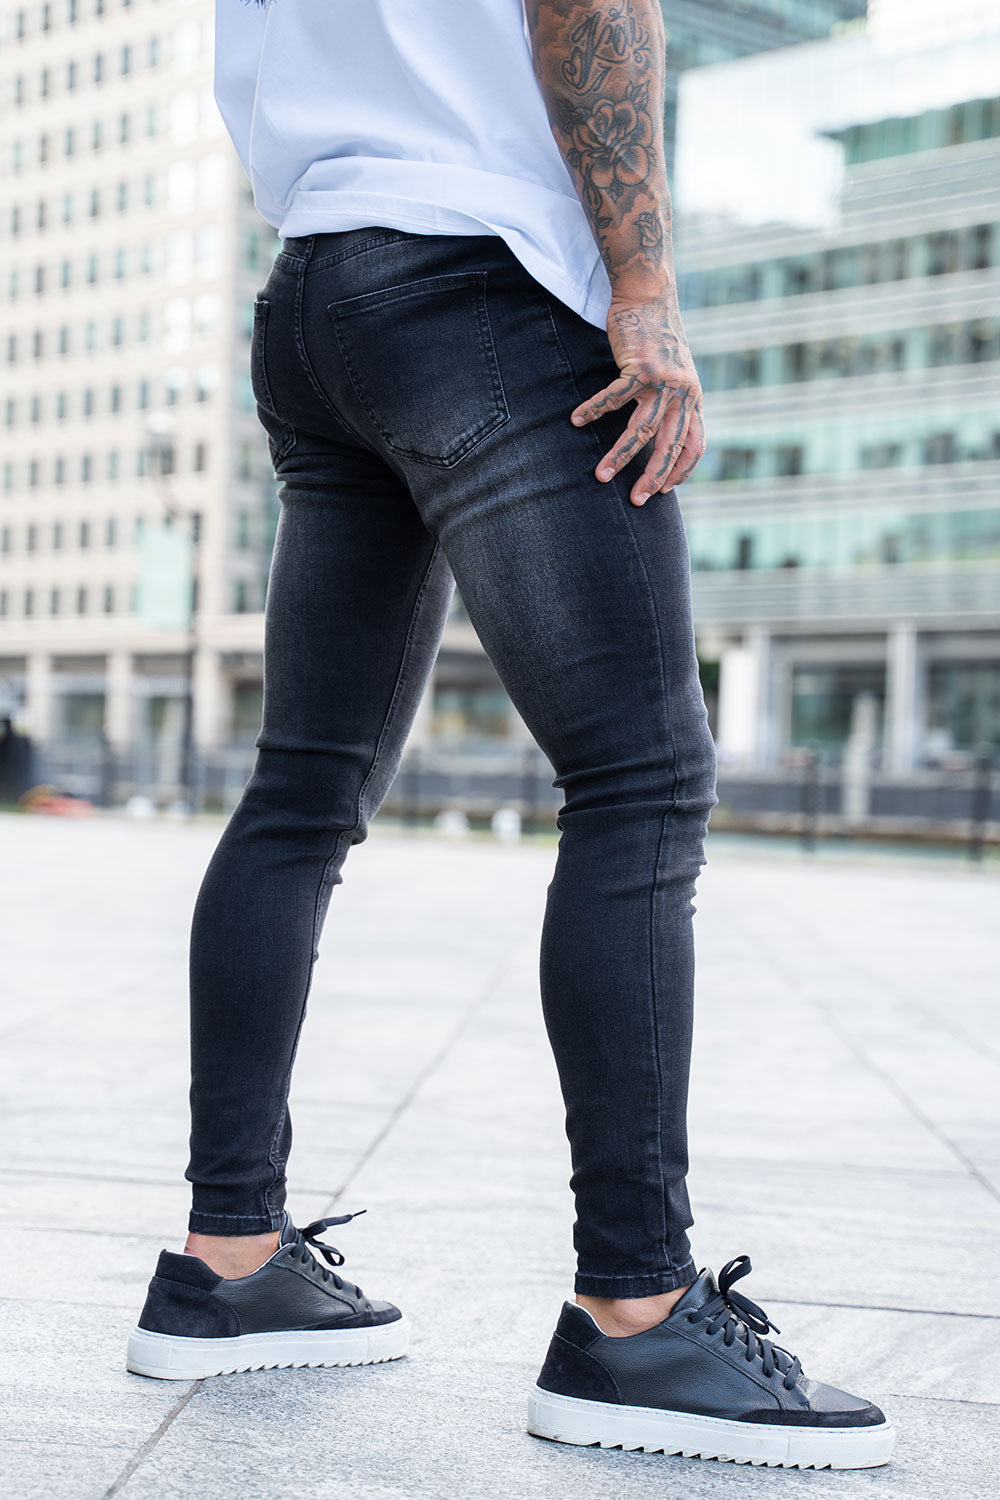 Gingtto Men's Black Skinny Fashionable Jeans: Elevate Your Streetwear